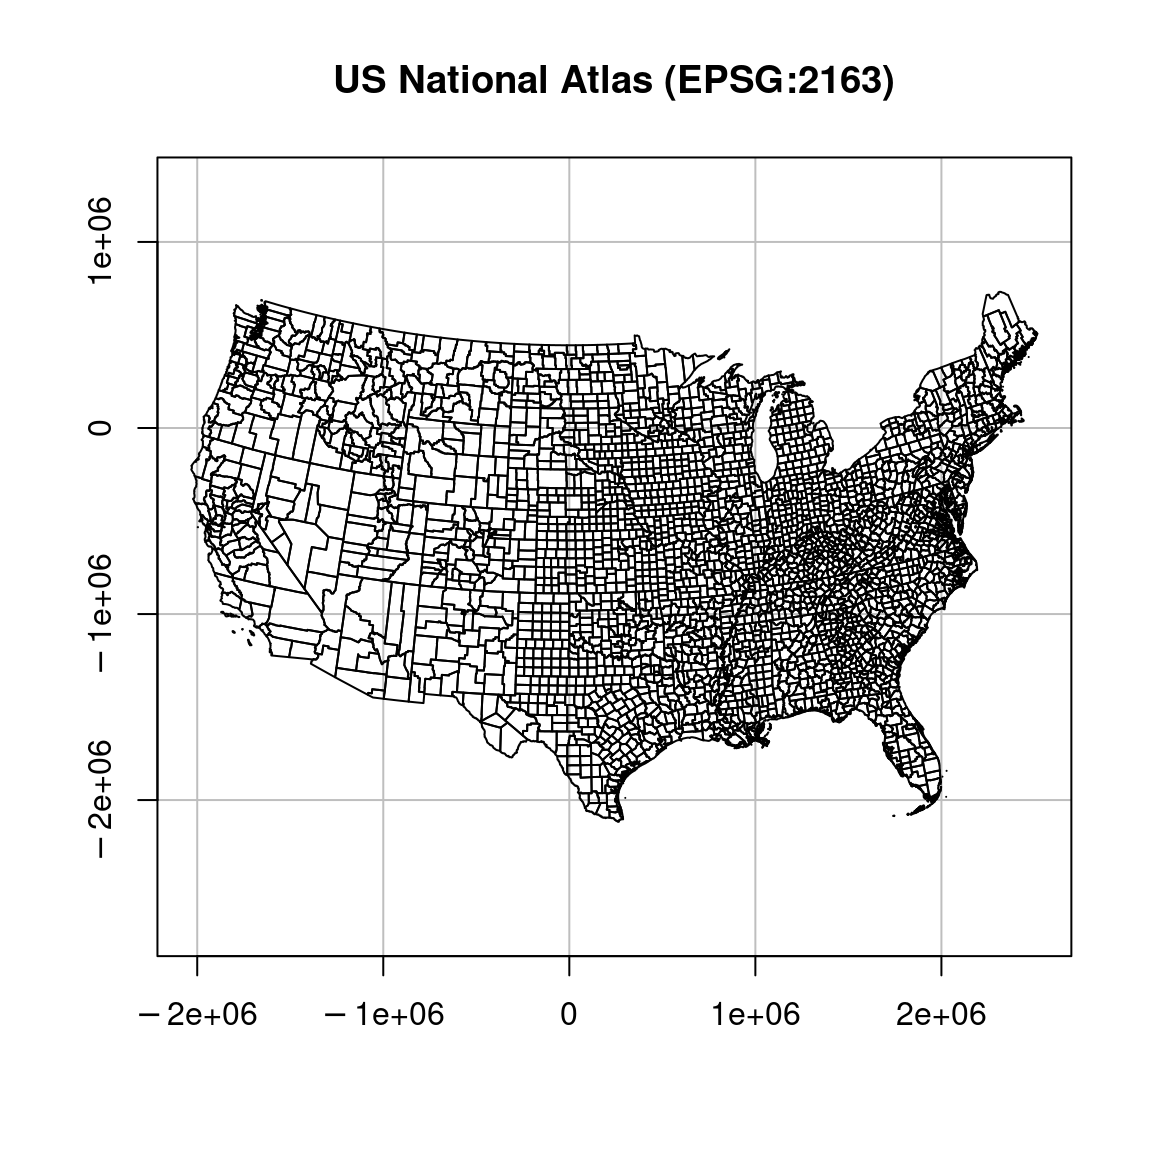 US counties in WGS84 and US Atlas projections